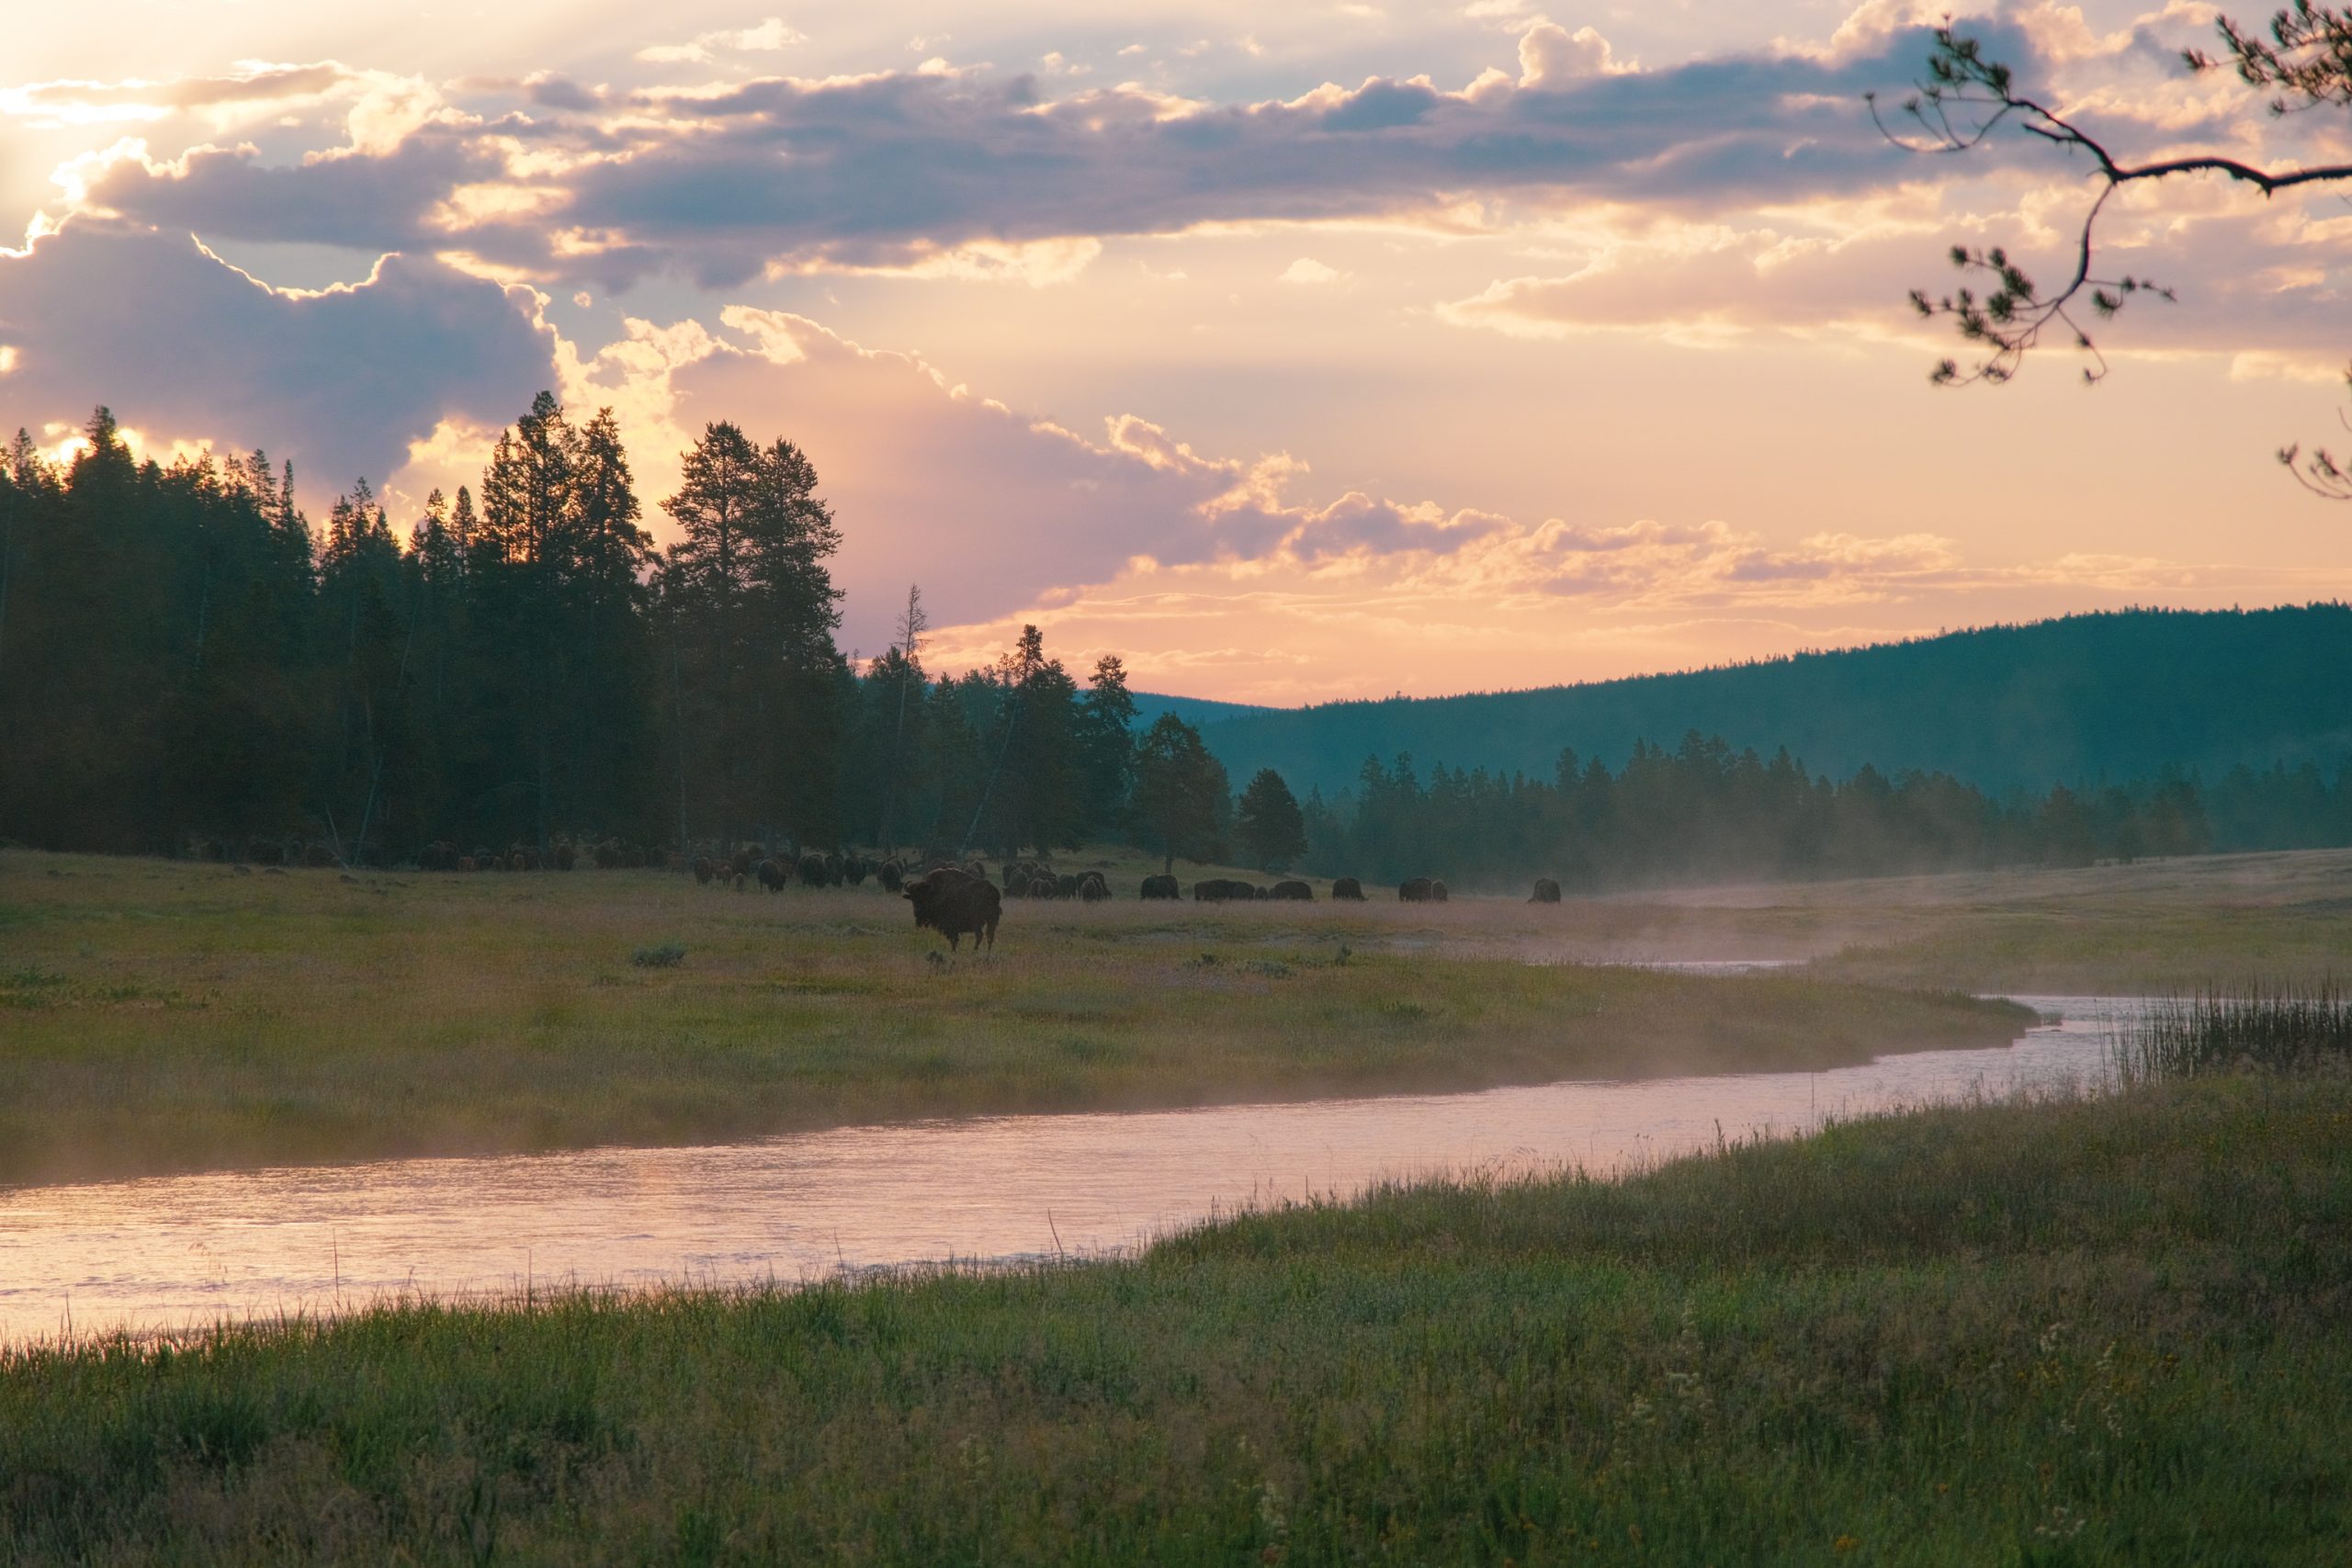 Bison in the early morning in Yellowstone on the Madison River